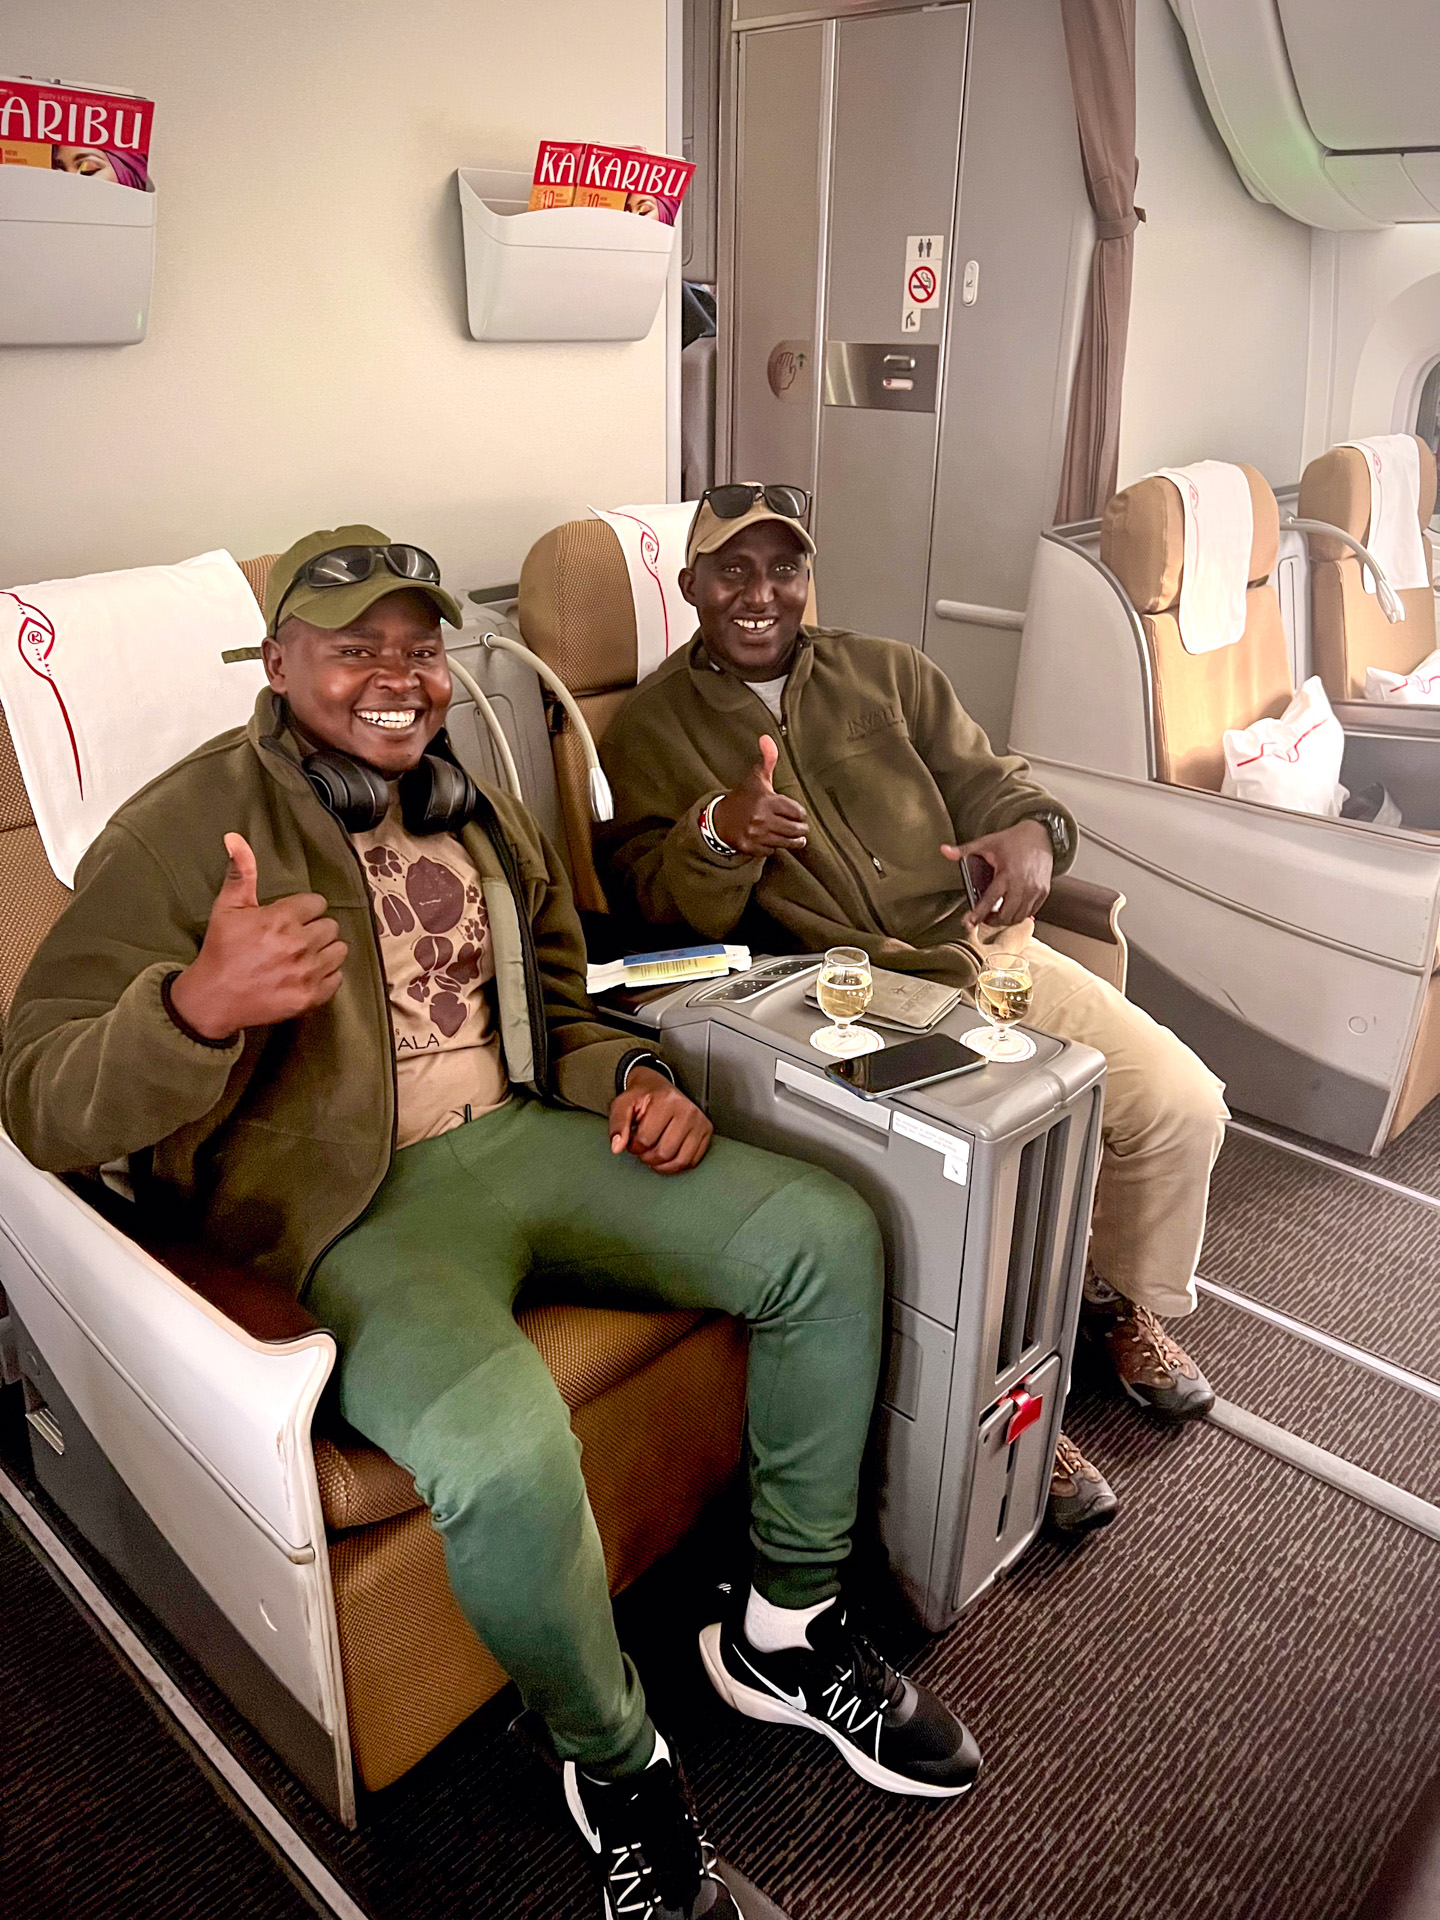 Special thanks to TGMM sponsor Kenyan Airways for the upgrade